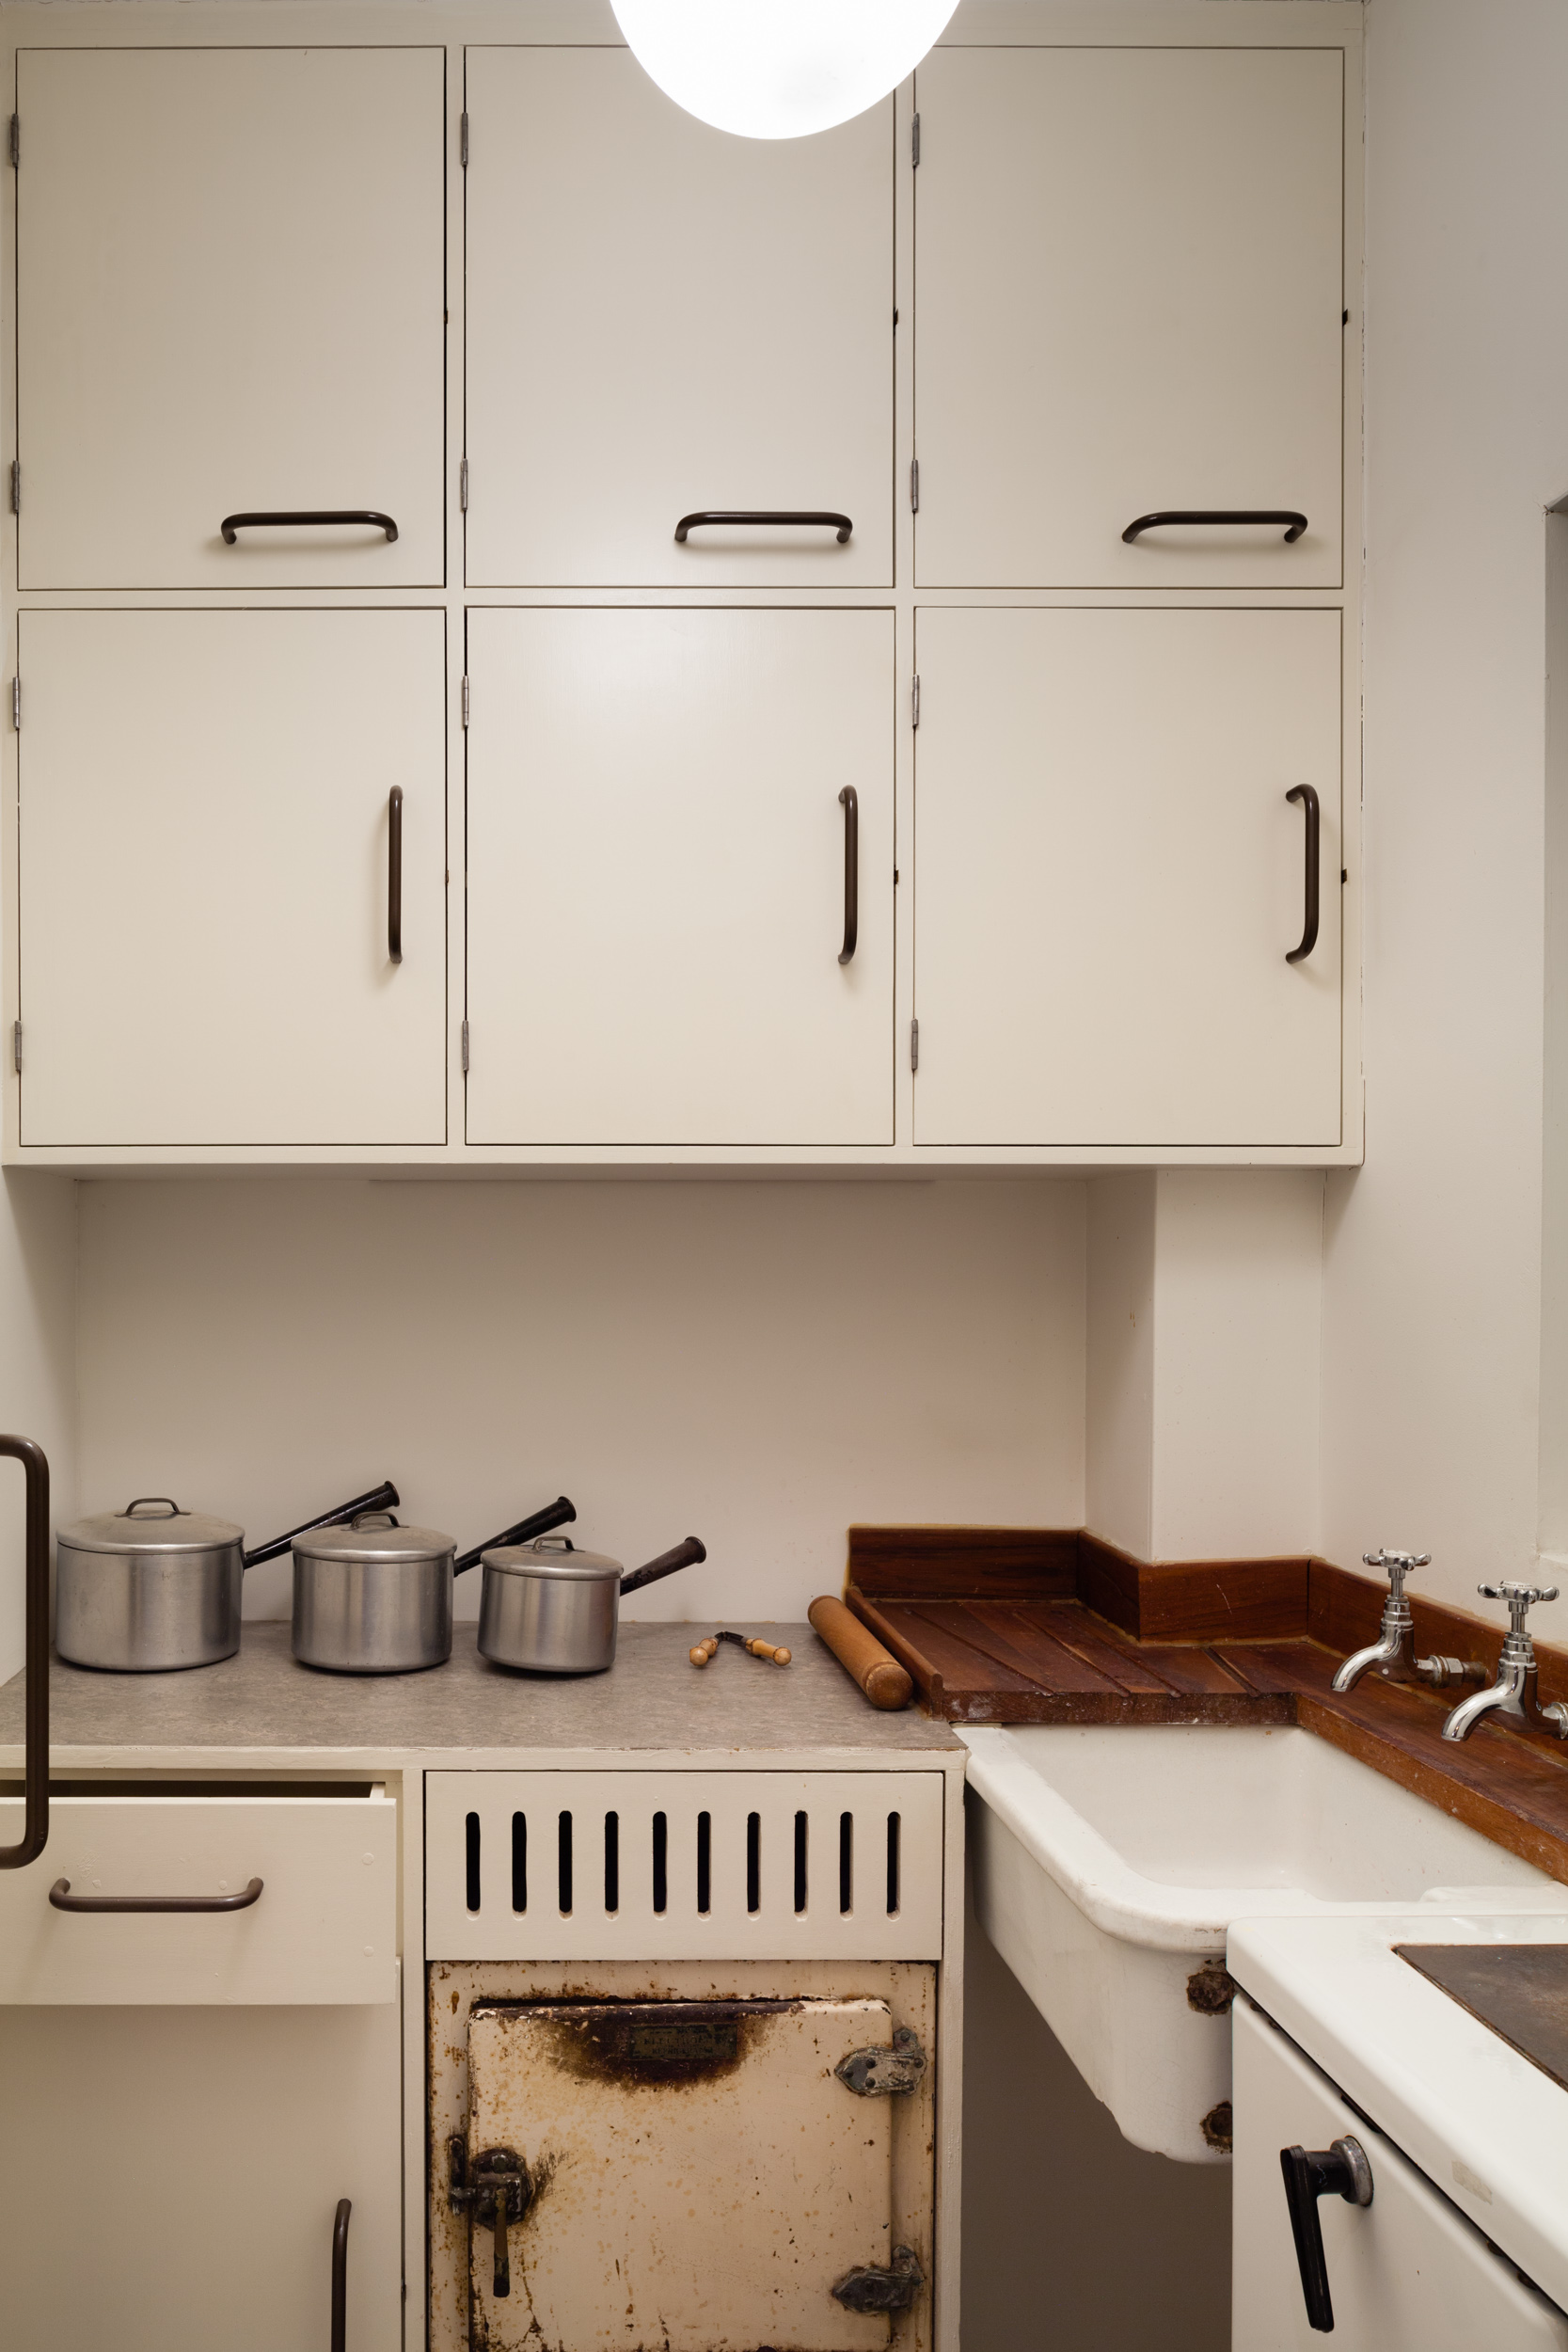 An archetypal kitchen is set up in the Isokon Gallery to give a feel for the interior residential spaces.